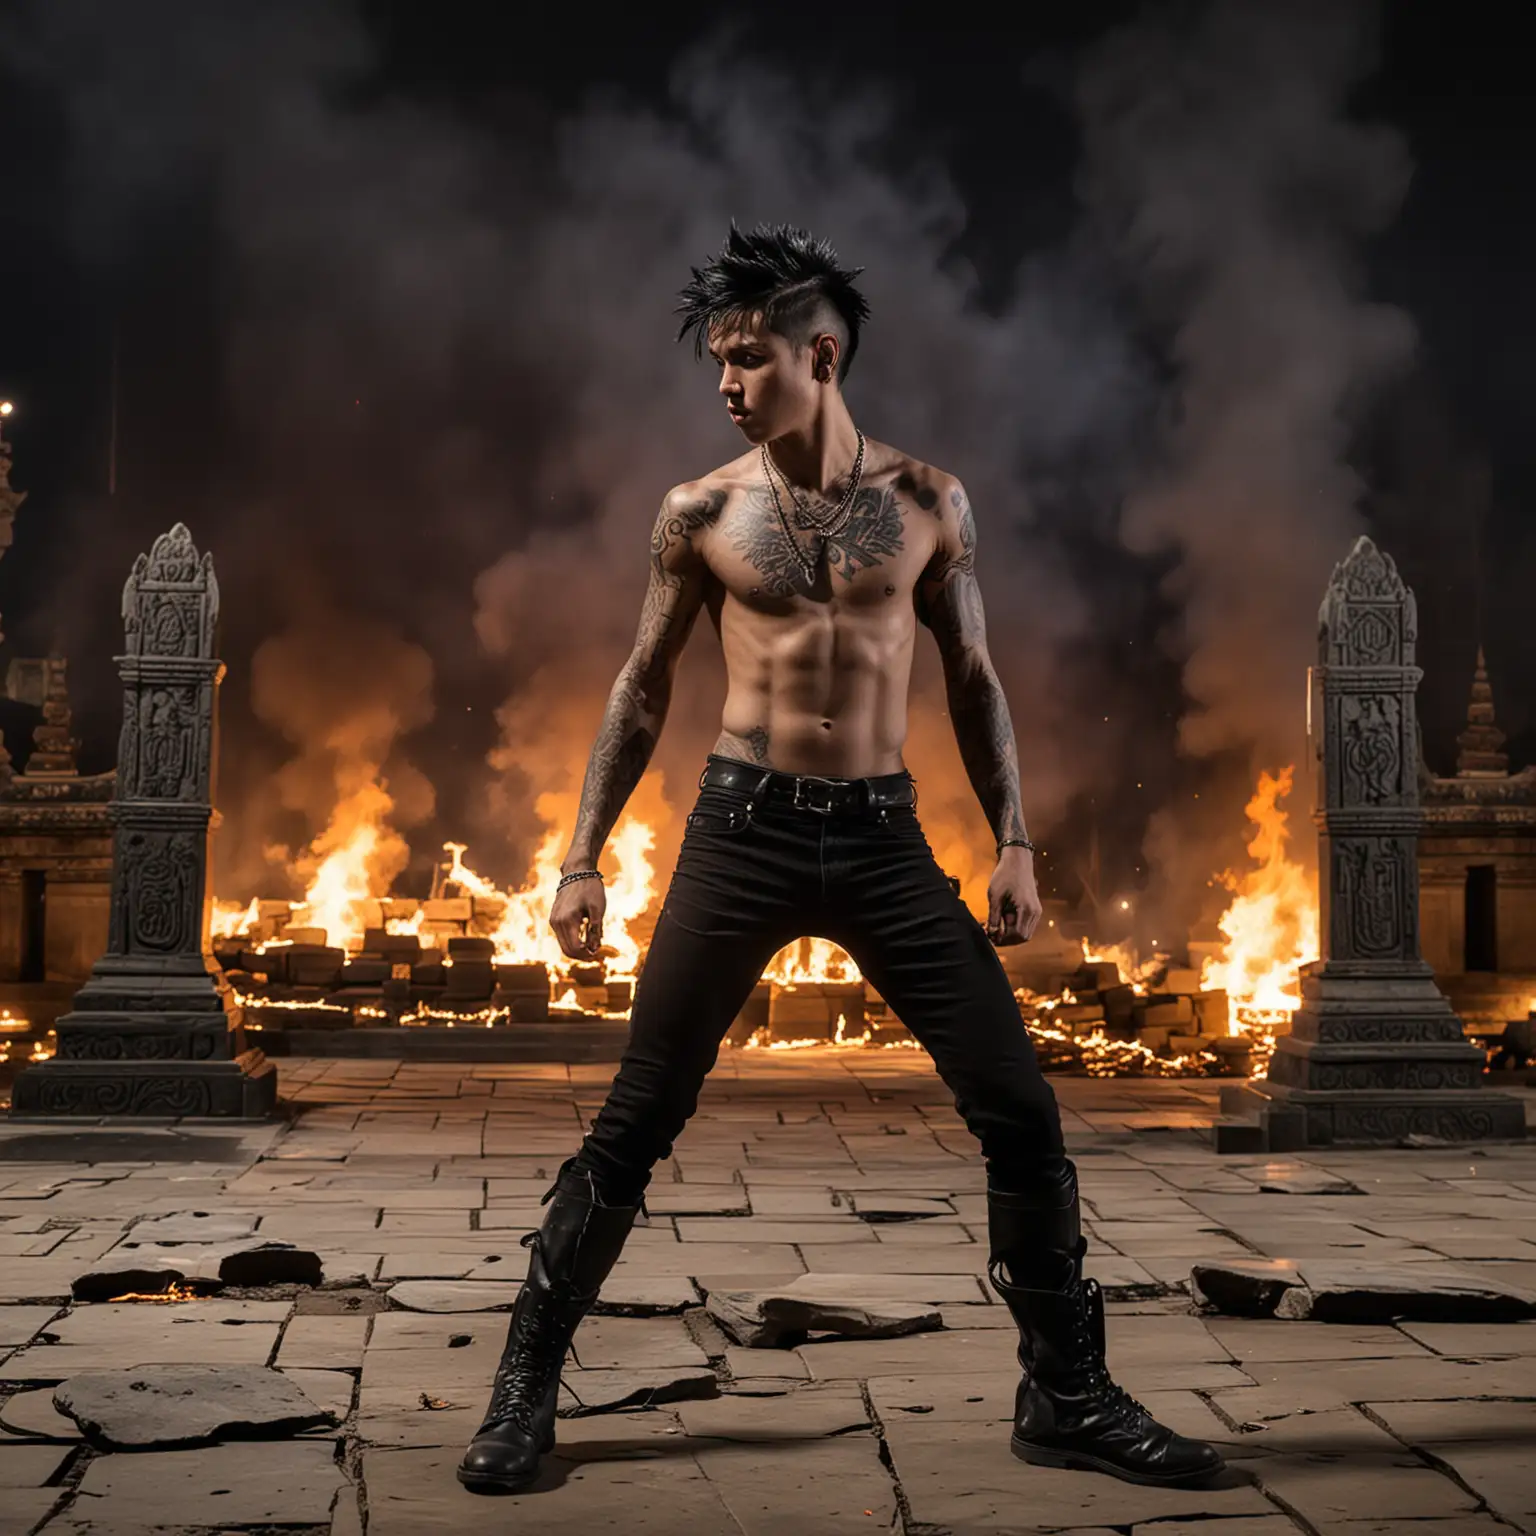 a bare-chested 16 year old boy with black mohak hair, body full of tattoos, wearing black cloth and black boots fighting with fire in front of Indonesian stone temple at night